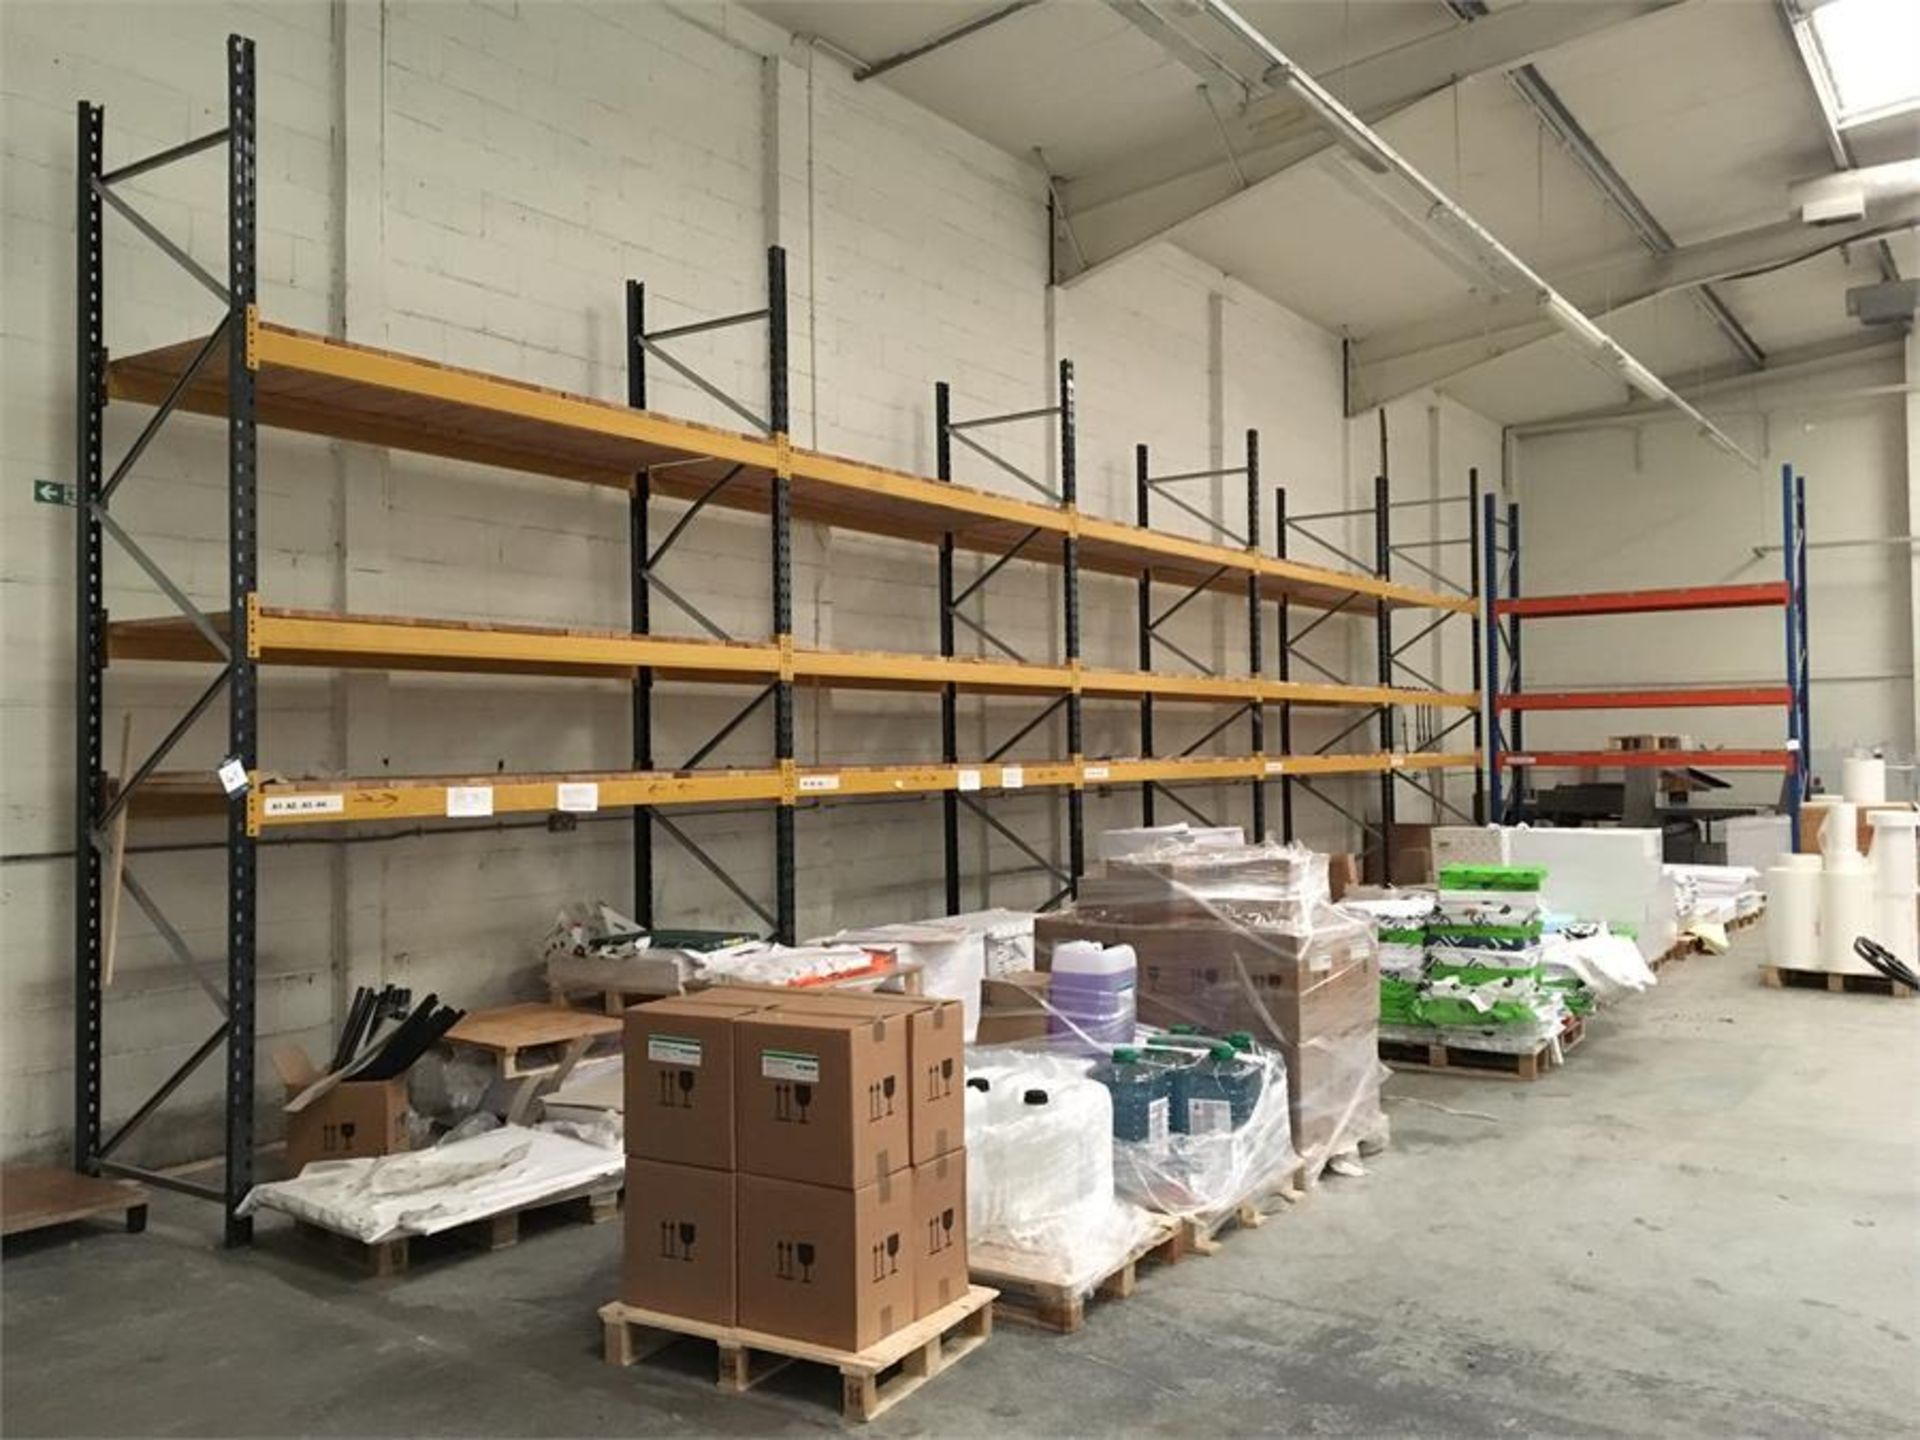 Six bays of boltless pallet racking comprising 8 x uprights and 36 x crossbeams (NB: excludes